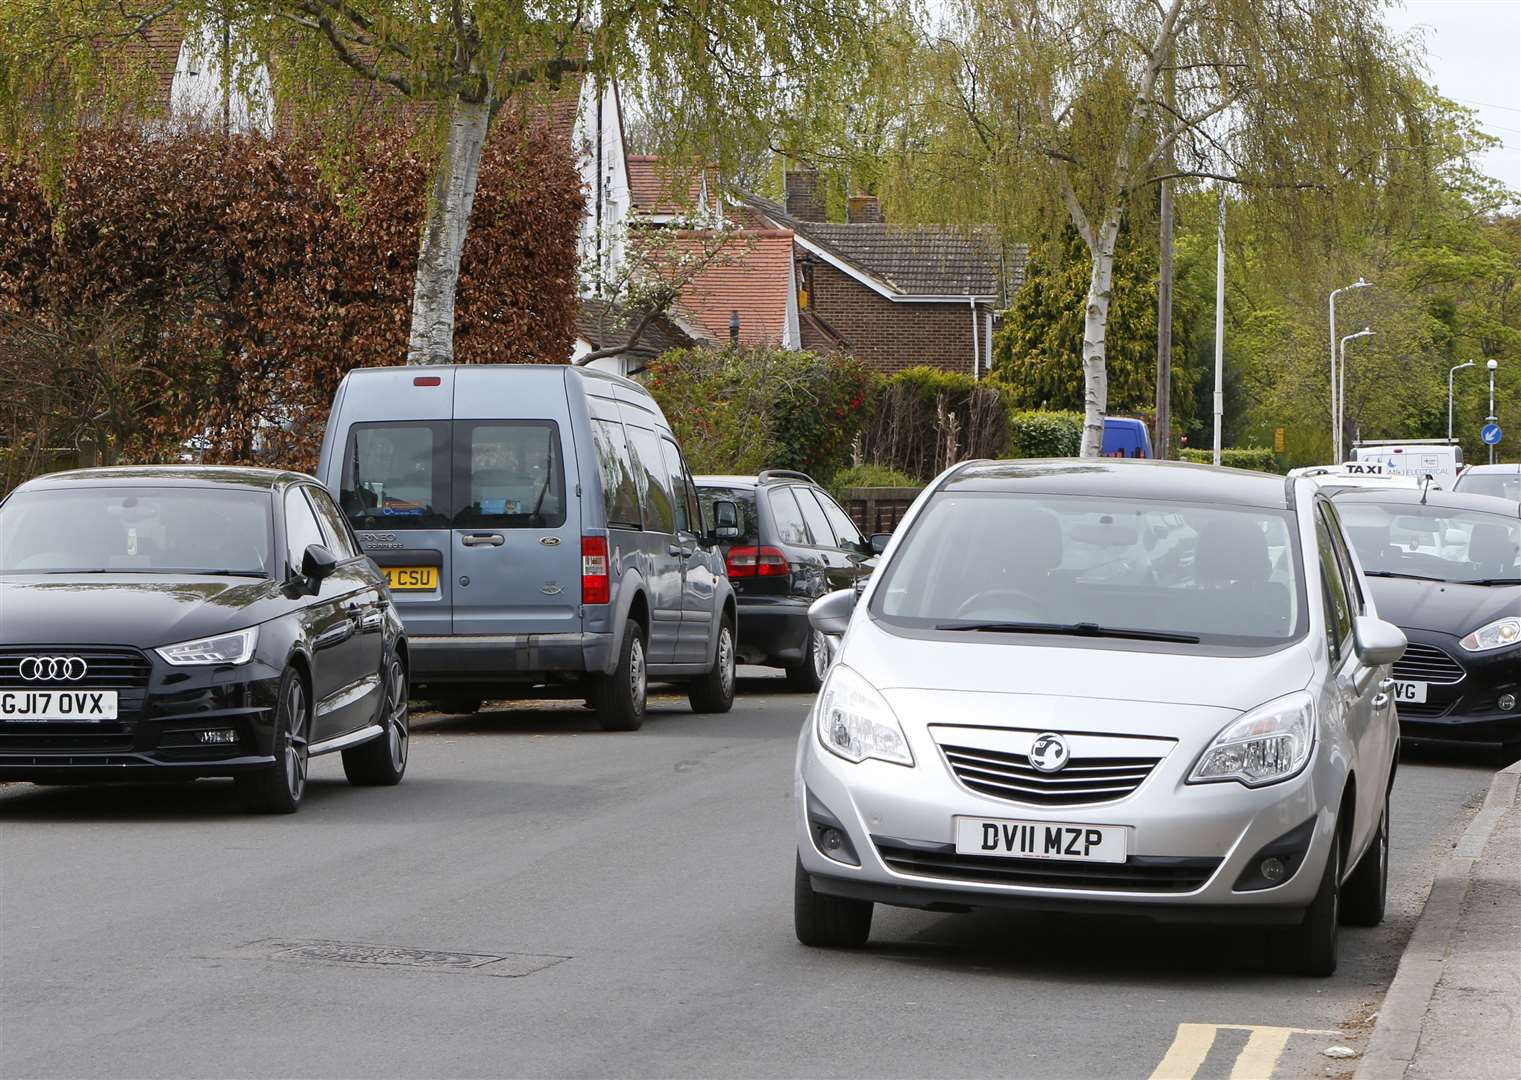 Highsted Road is a bottleneck for traffic because of parked cars